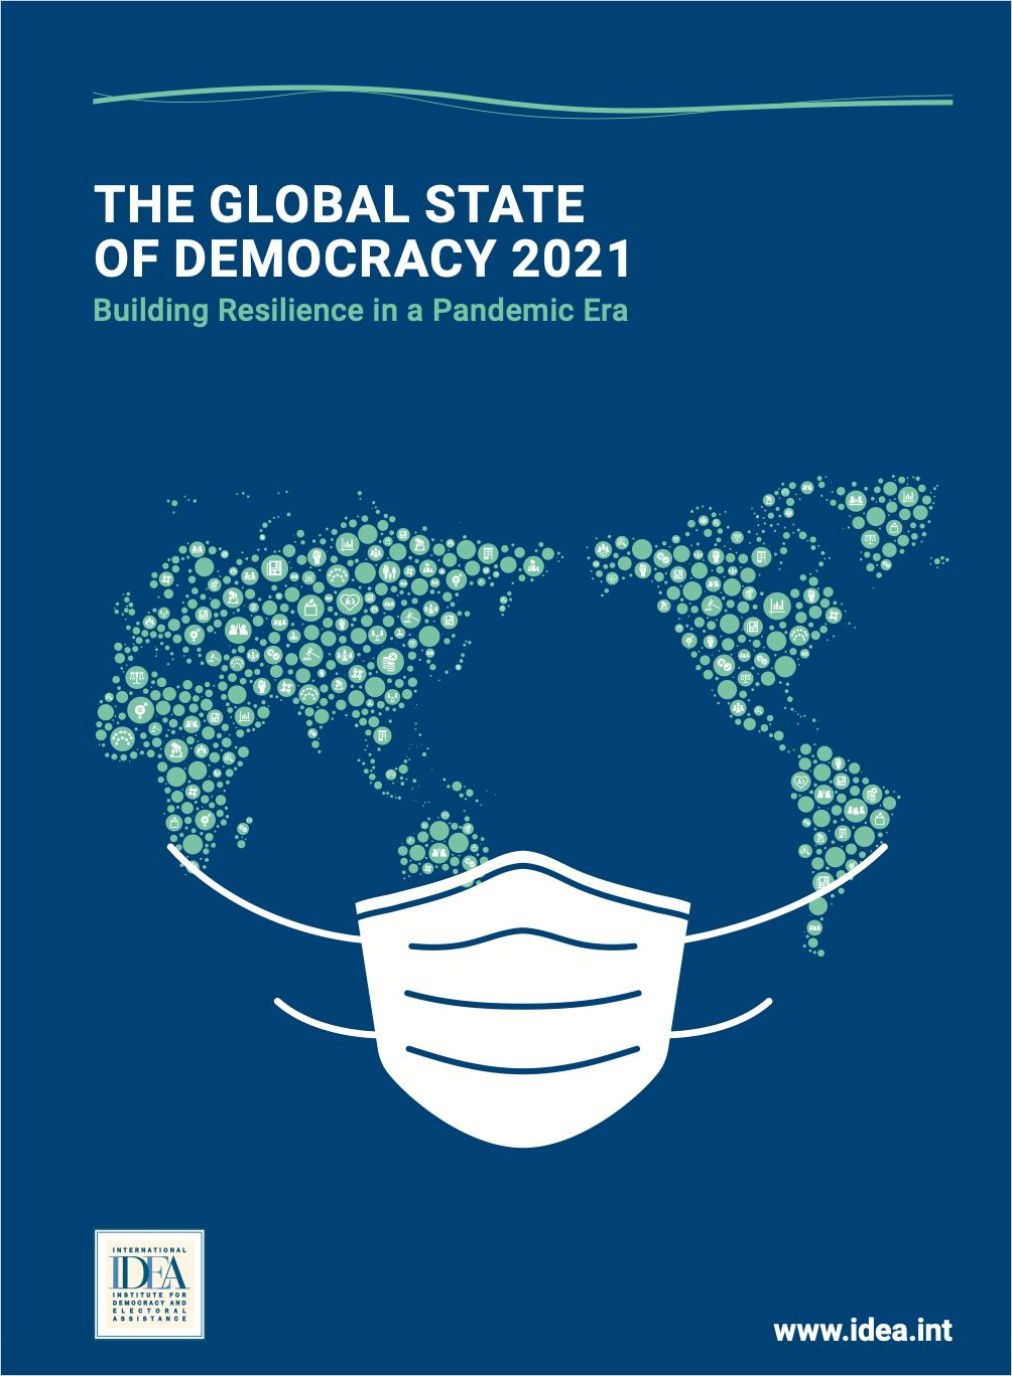 Image of: The Global State of Democracy 2021